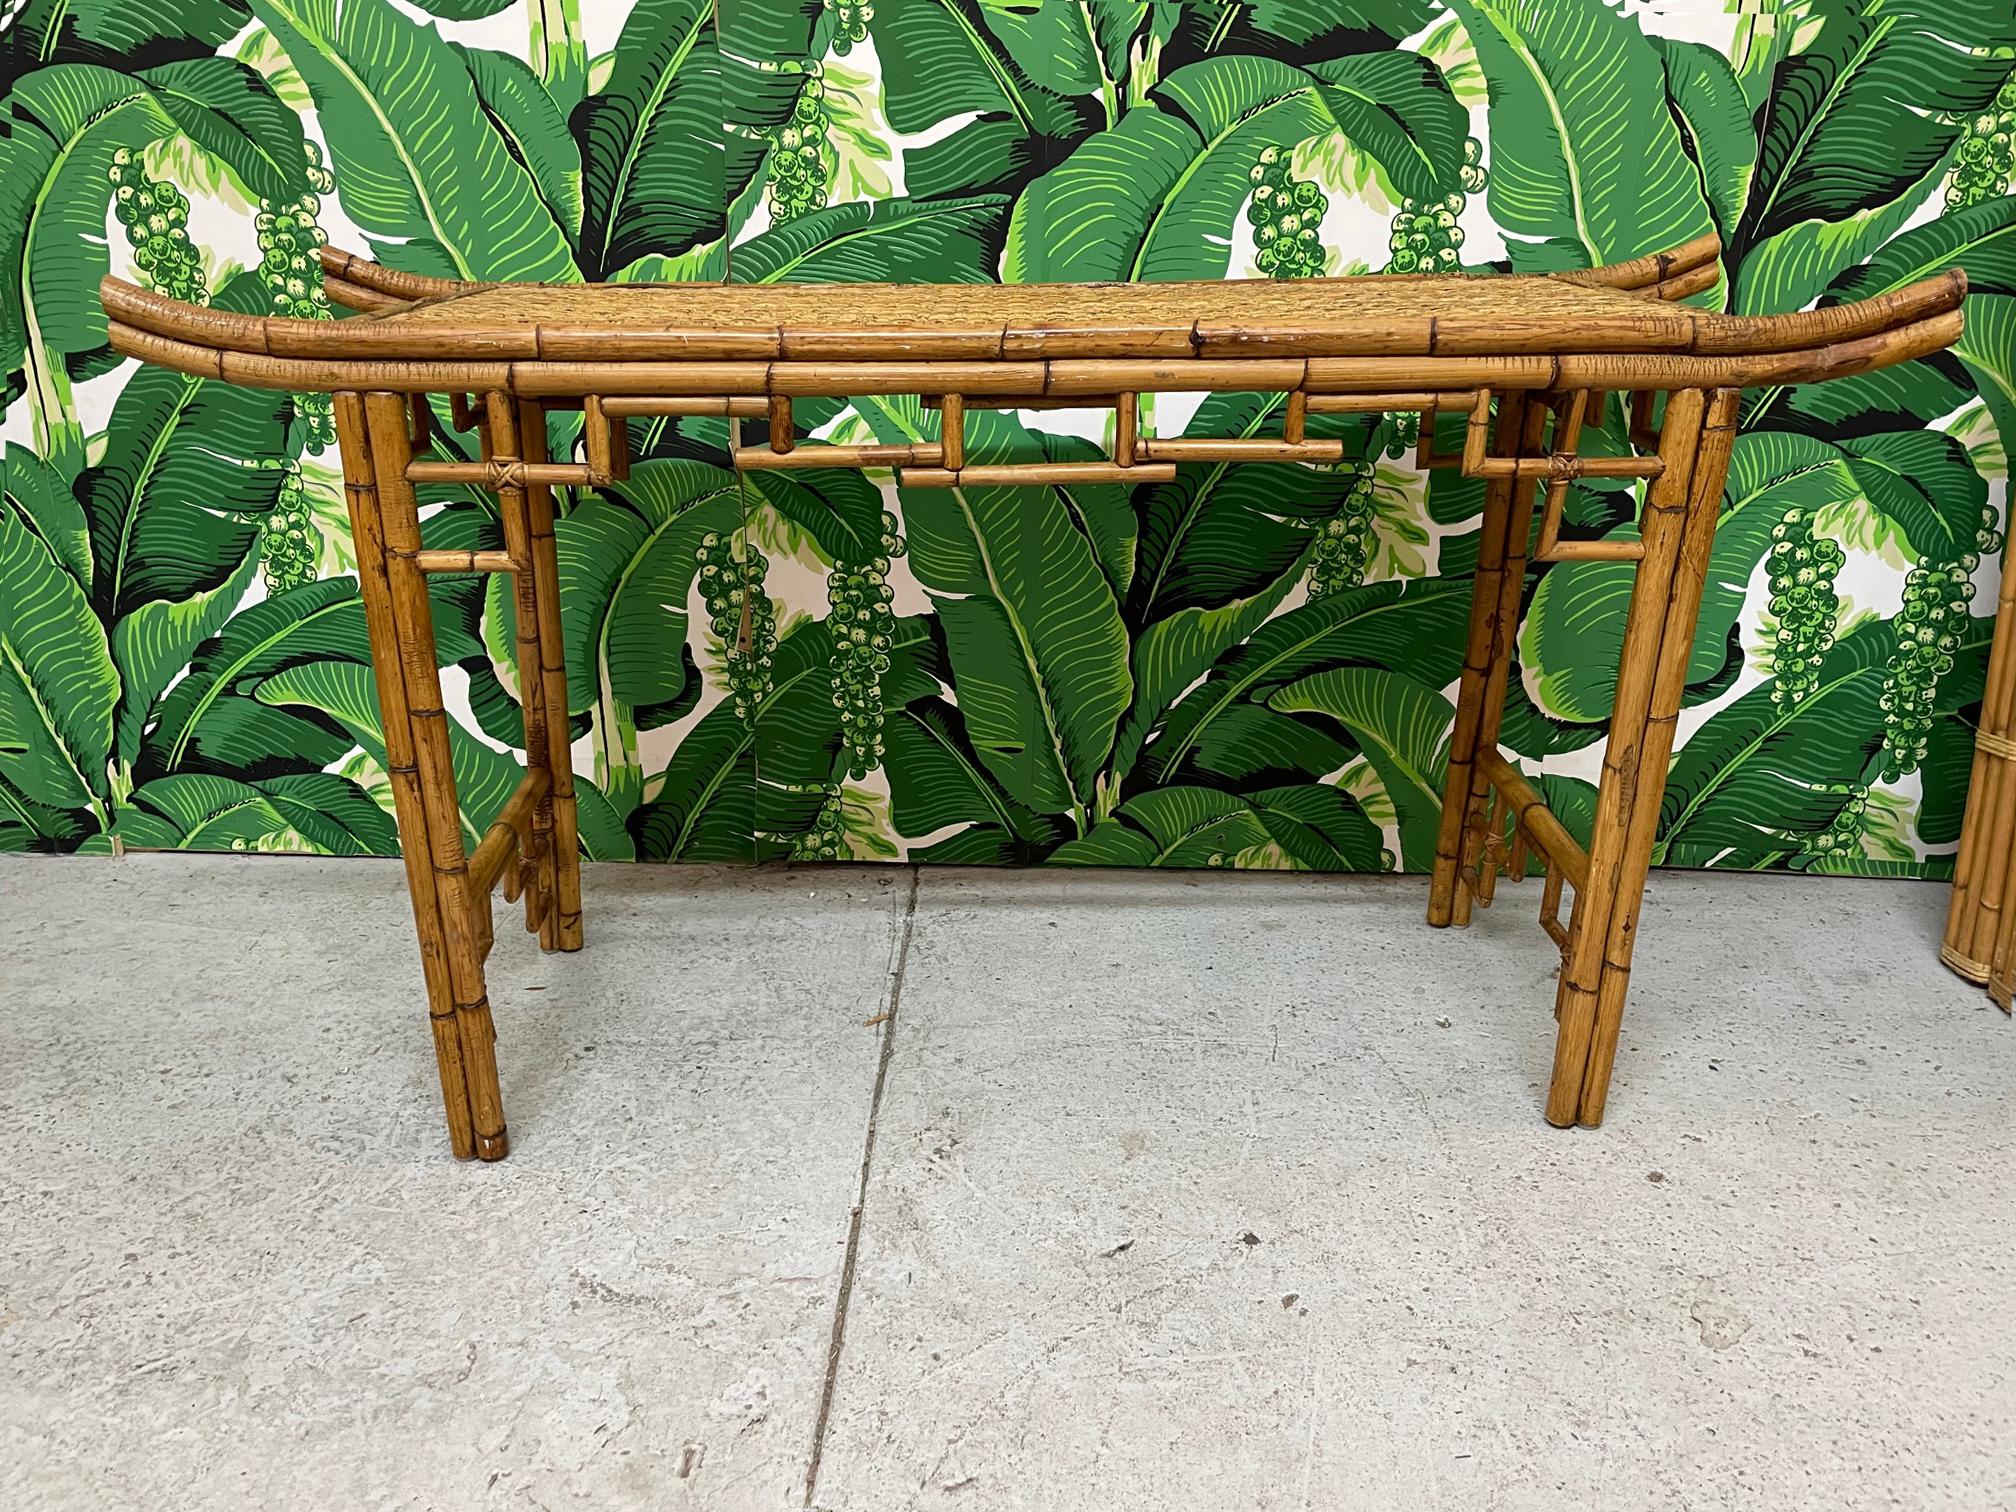 Vintage bamboo console or altar table features Asian chinoiserie styling with everted ends and decorative bamboo apron and spandrels. Top is veneered in woven wicker. Good condition with imperfections consistent with age, see photos for condition